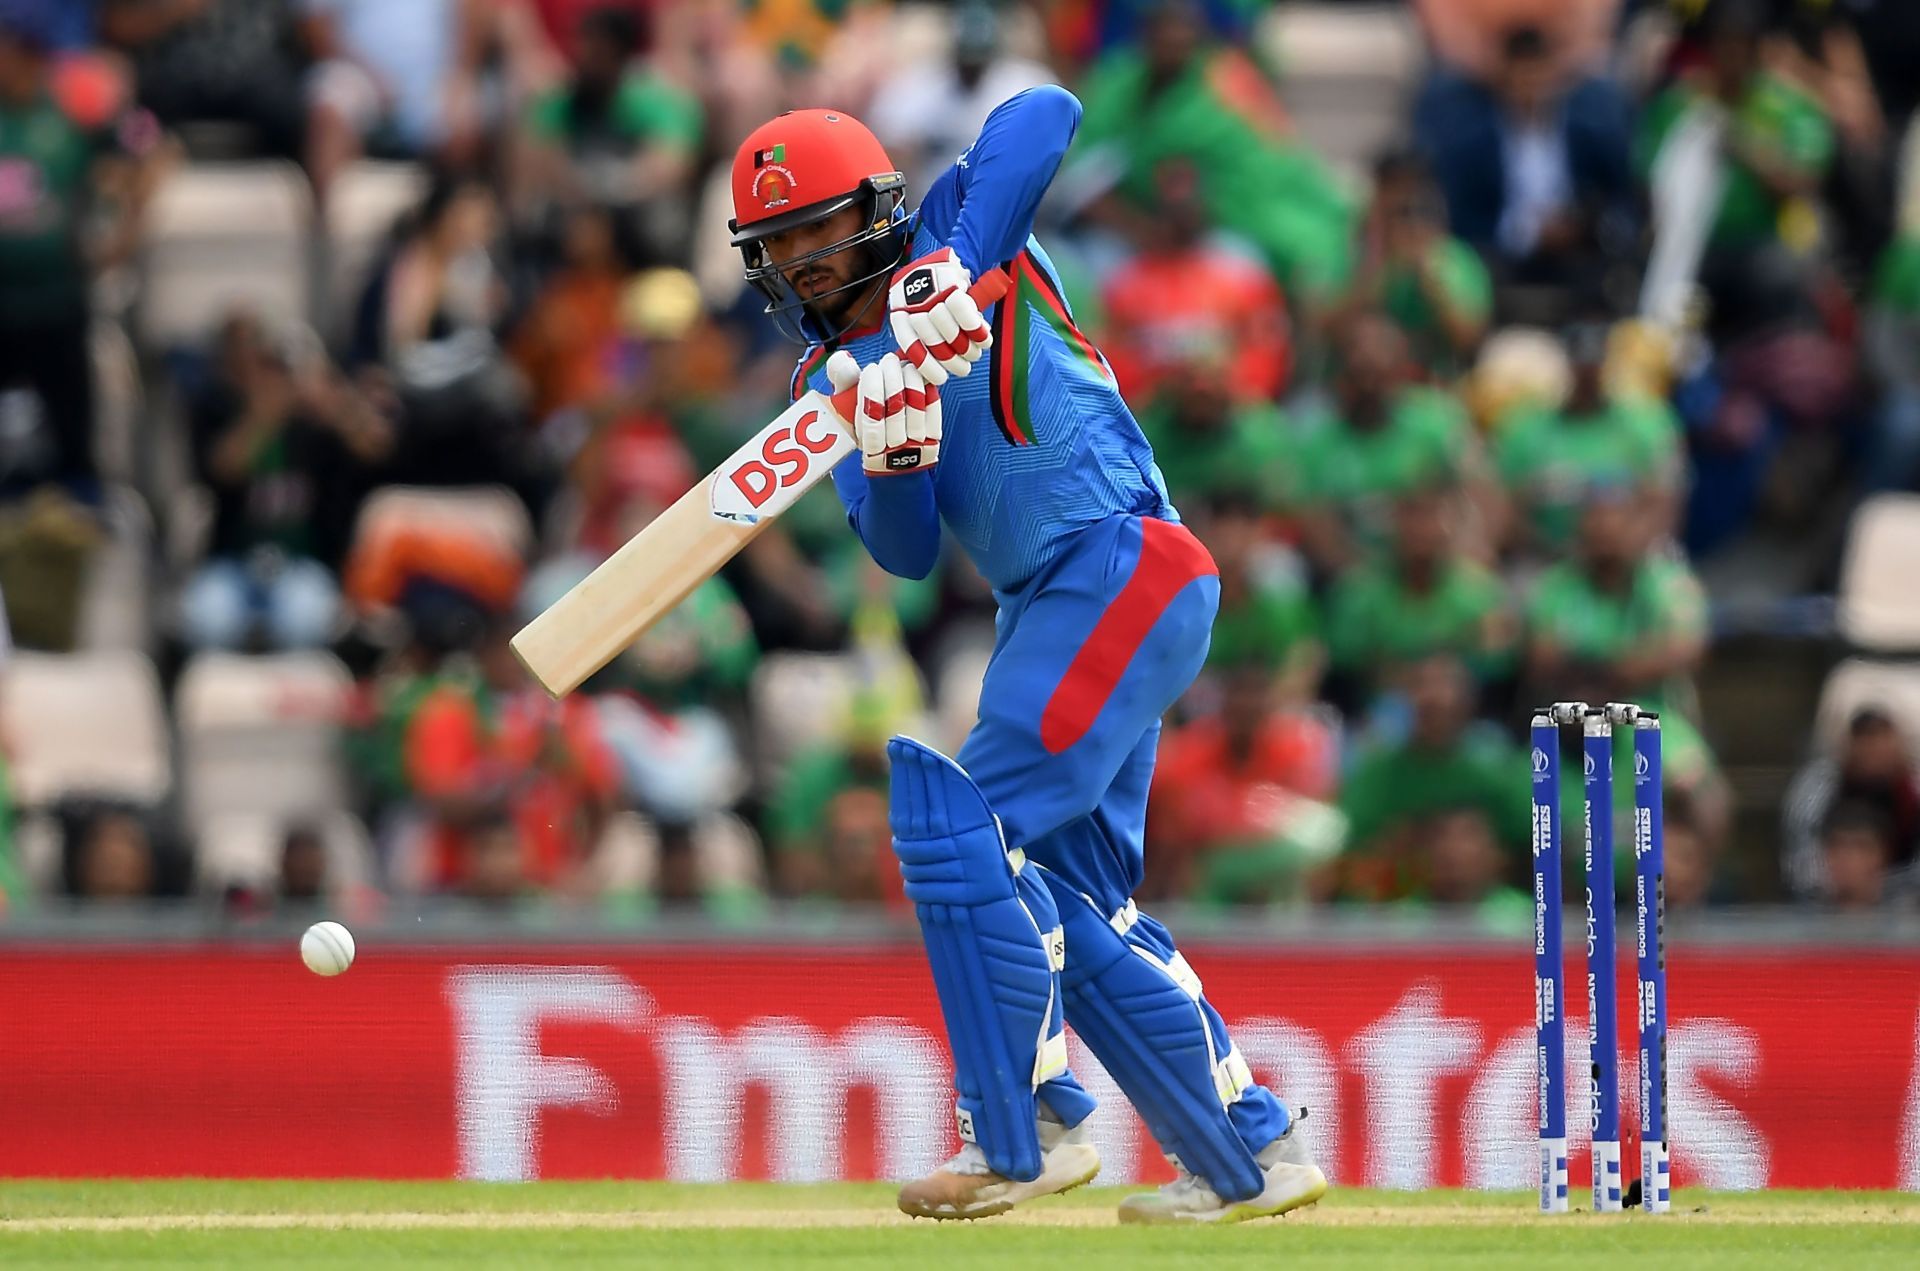 Bangladesh v Afghanistan - ICC Cricket World Cup 2019 (Image courtesy: Getty Images)